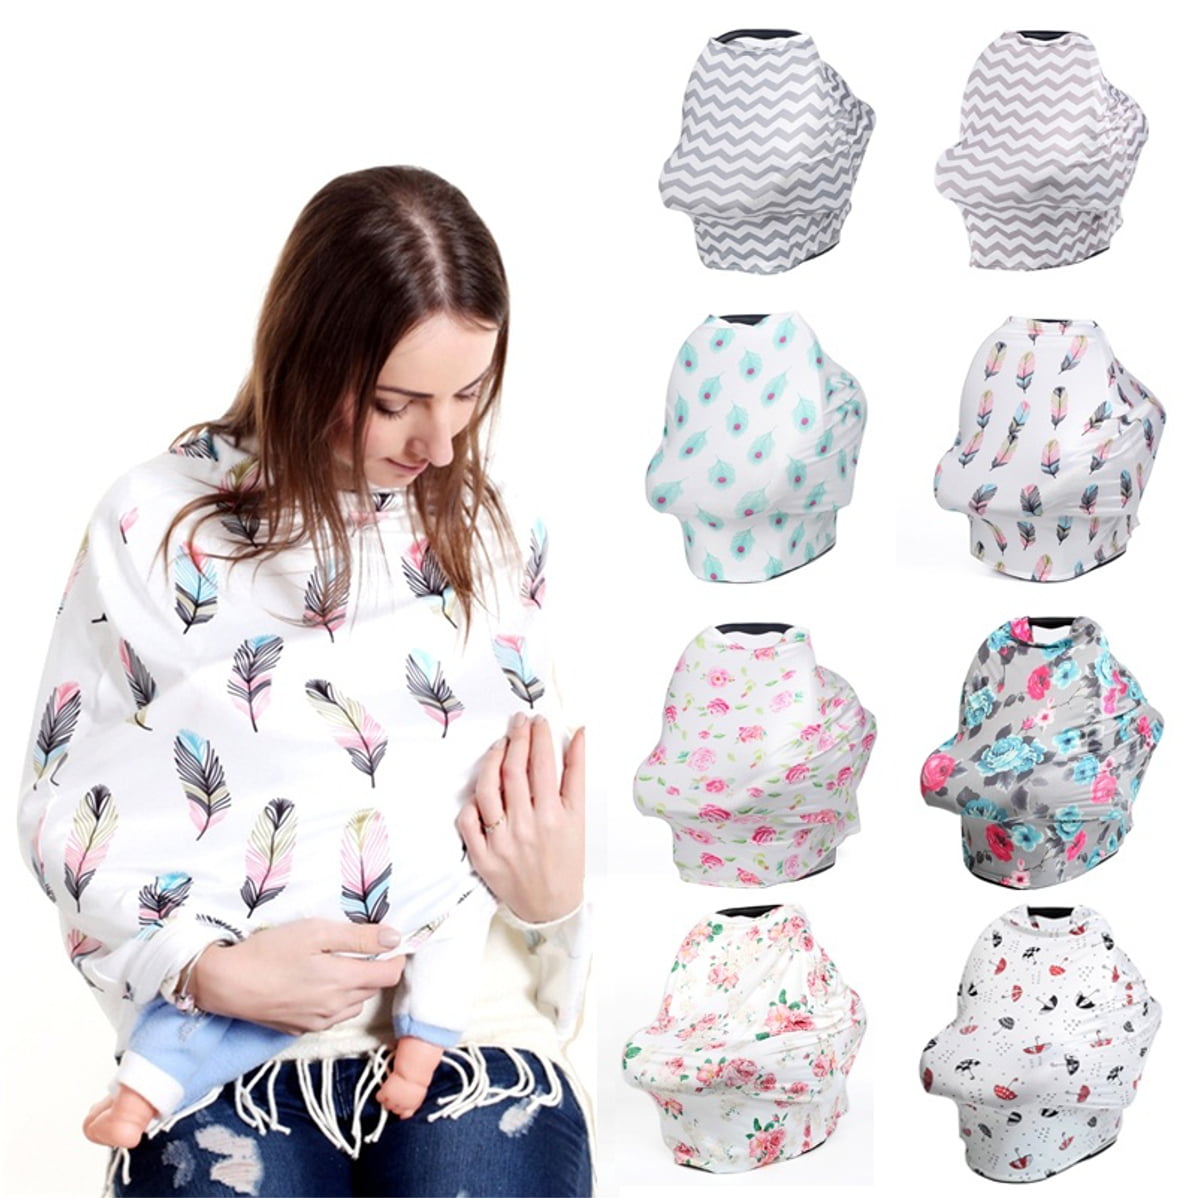 Breastfeeding Cover Nursing Privacy Top Canopy Baby Feeding Scarf Blanket Covers 